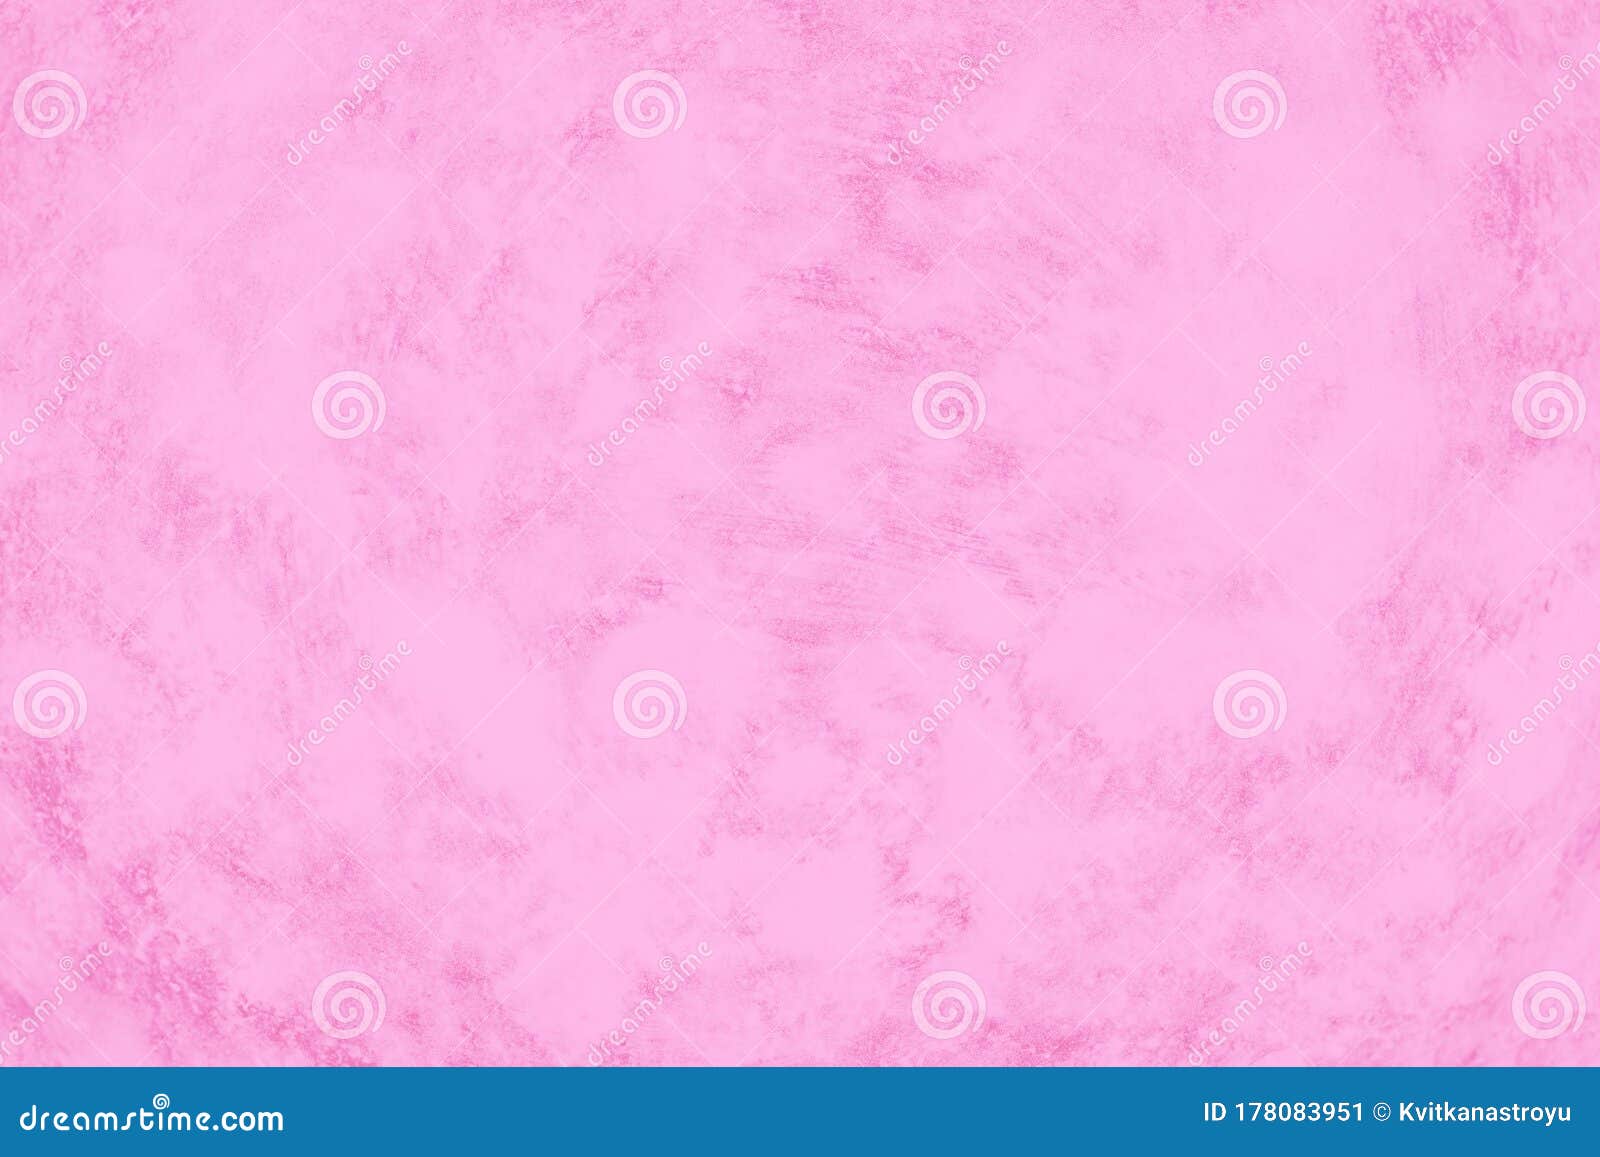 Pink Patchy Background. Ceramic Abstract Background with Smears of ...